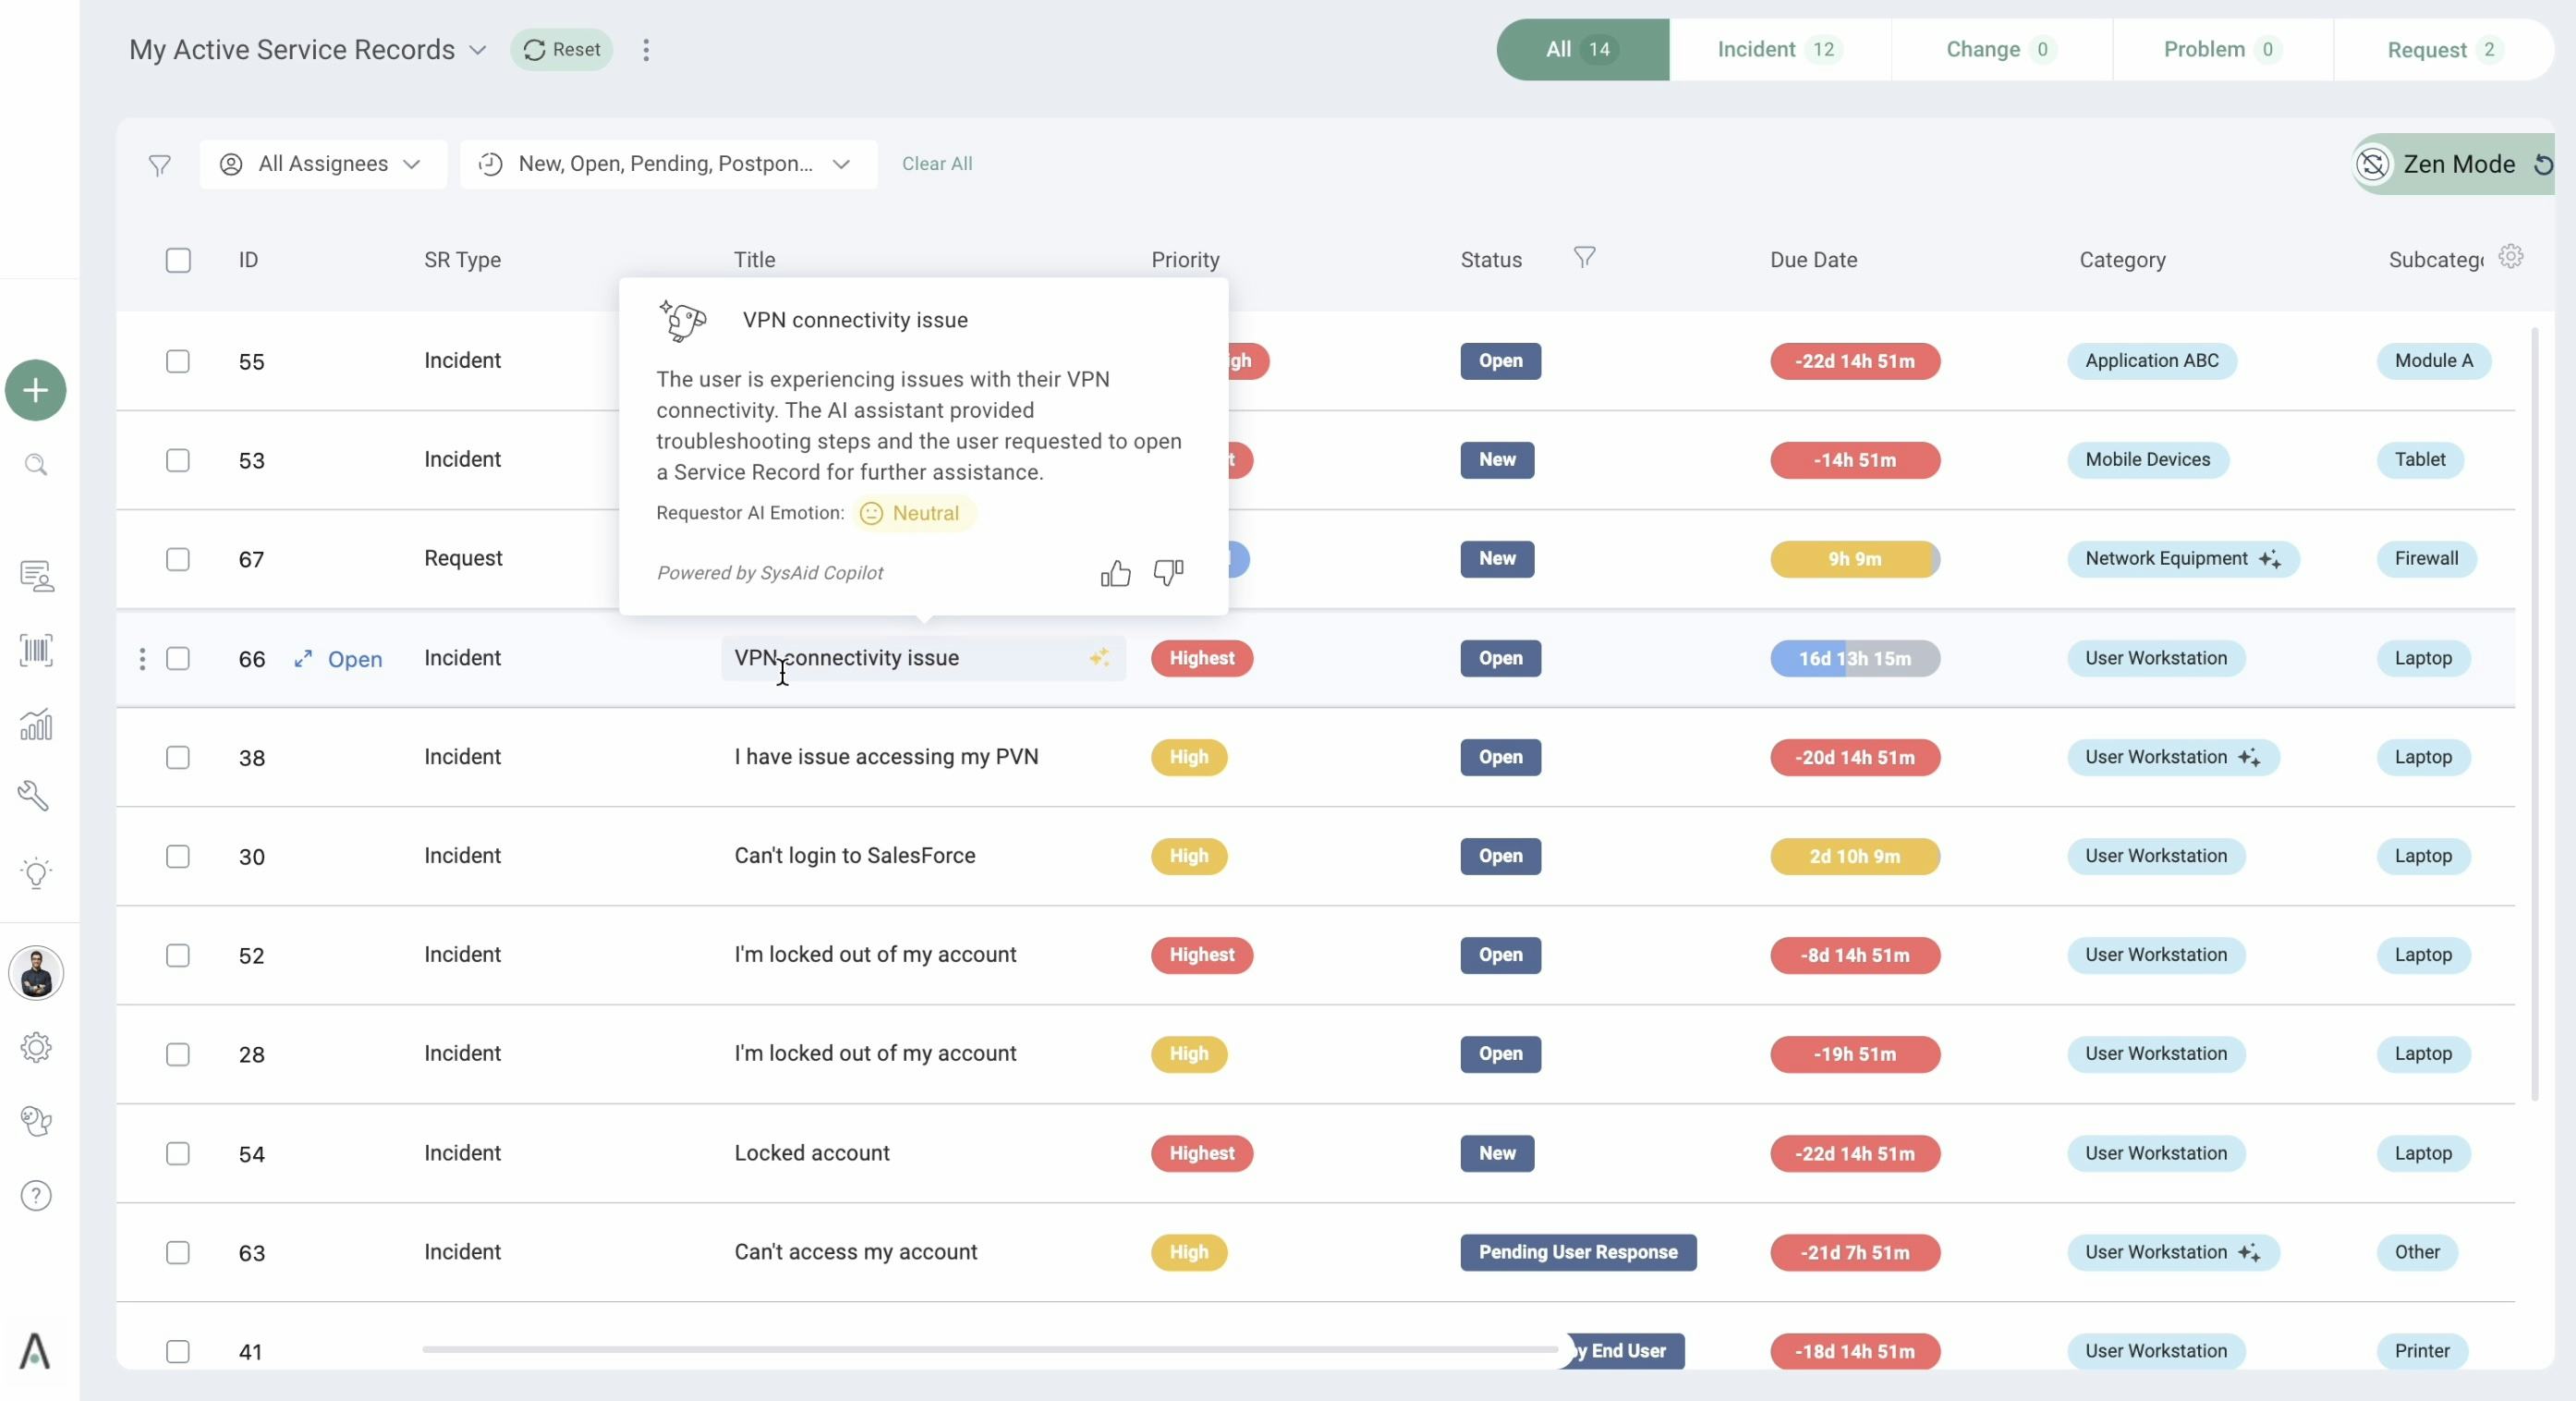 SysAid Software - Ticket Queue	- A consolidated, easy-to-navigate view of the ticket queue to help admins resolve issues more effectively and more efficiently.